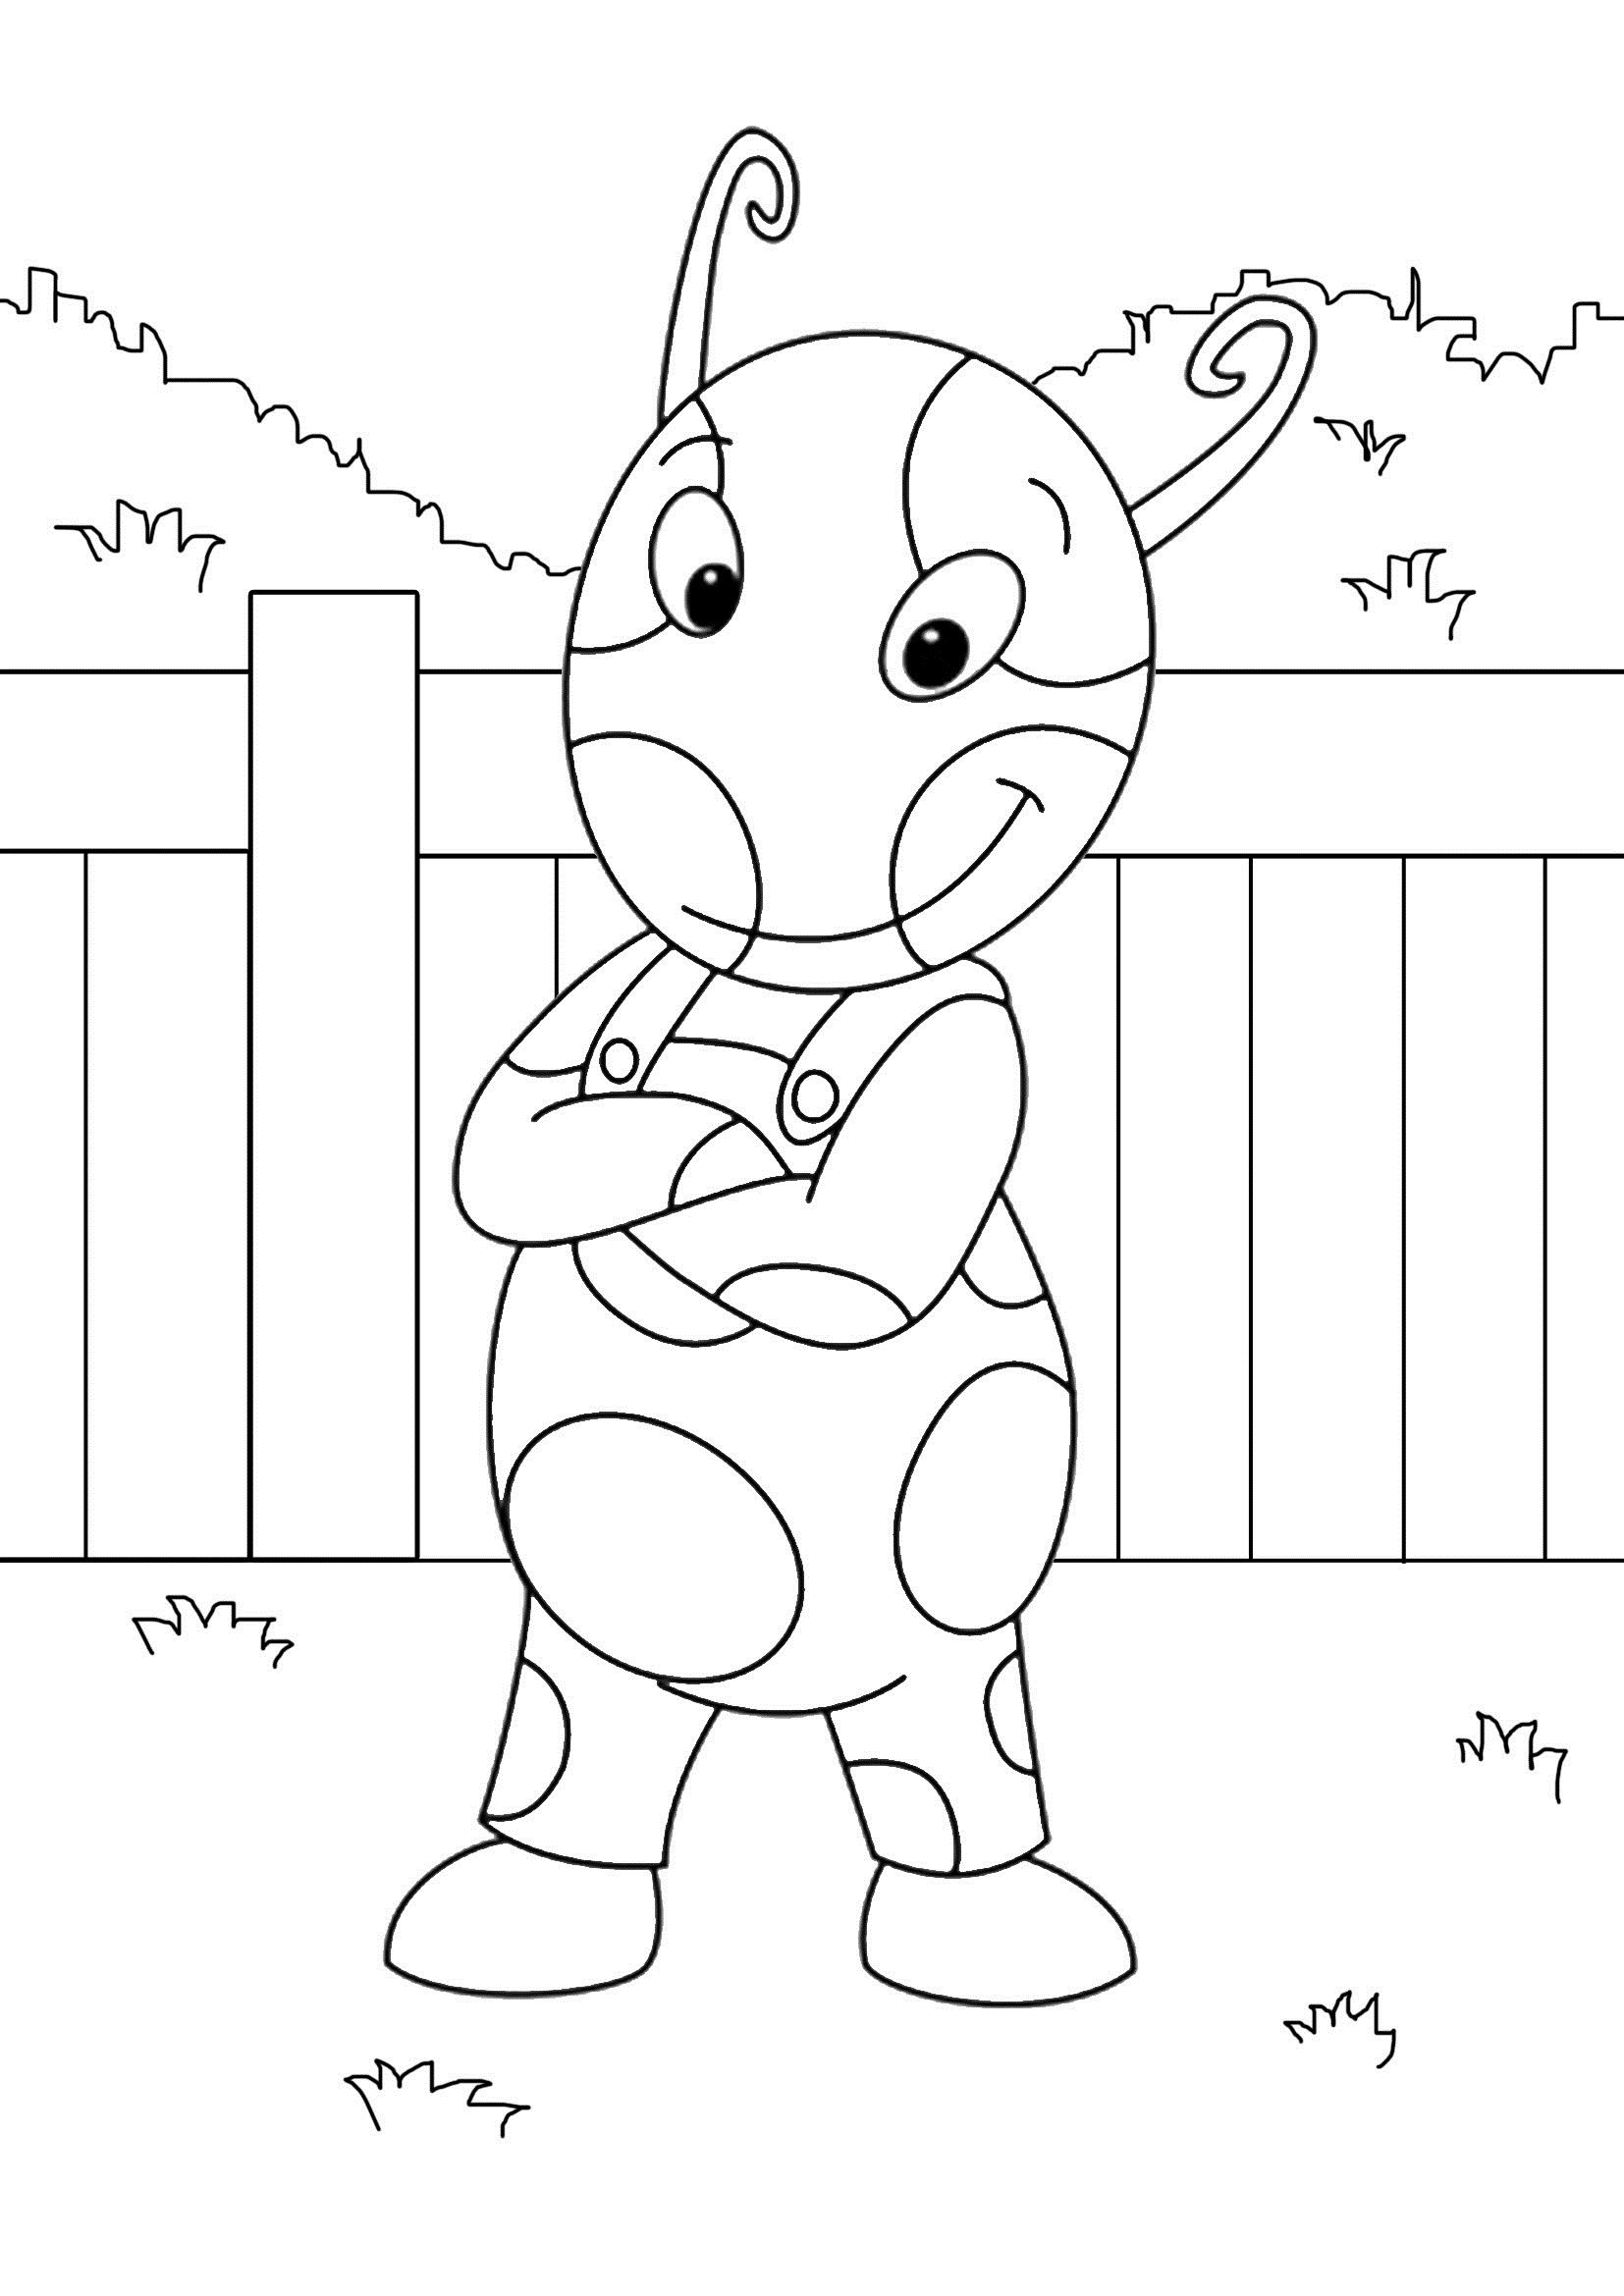 Printable Coloring Pages For Toddlers Free
 Free Printable Backyardigans Coloring Pages For Kids